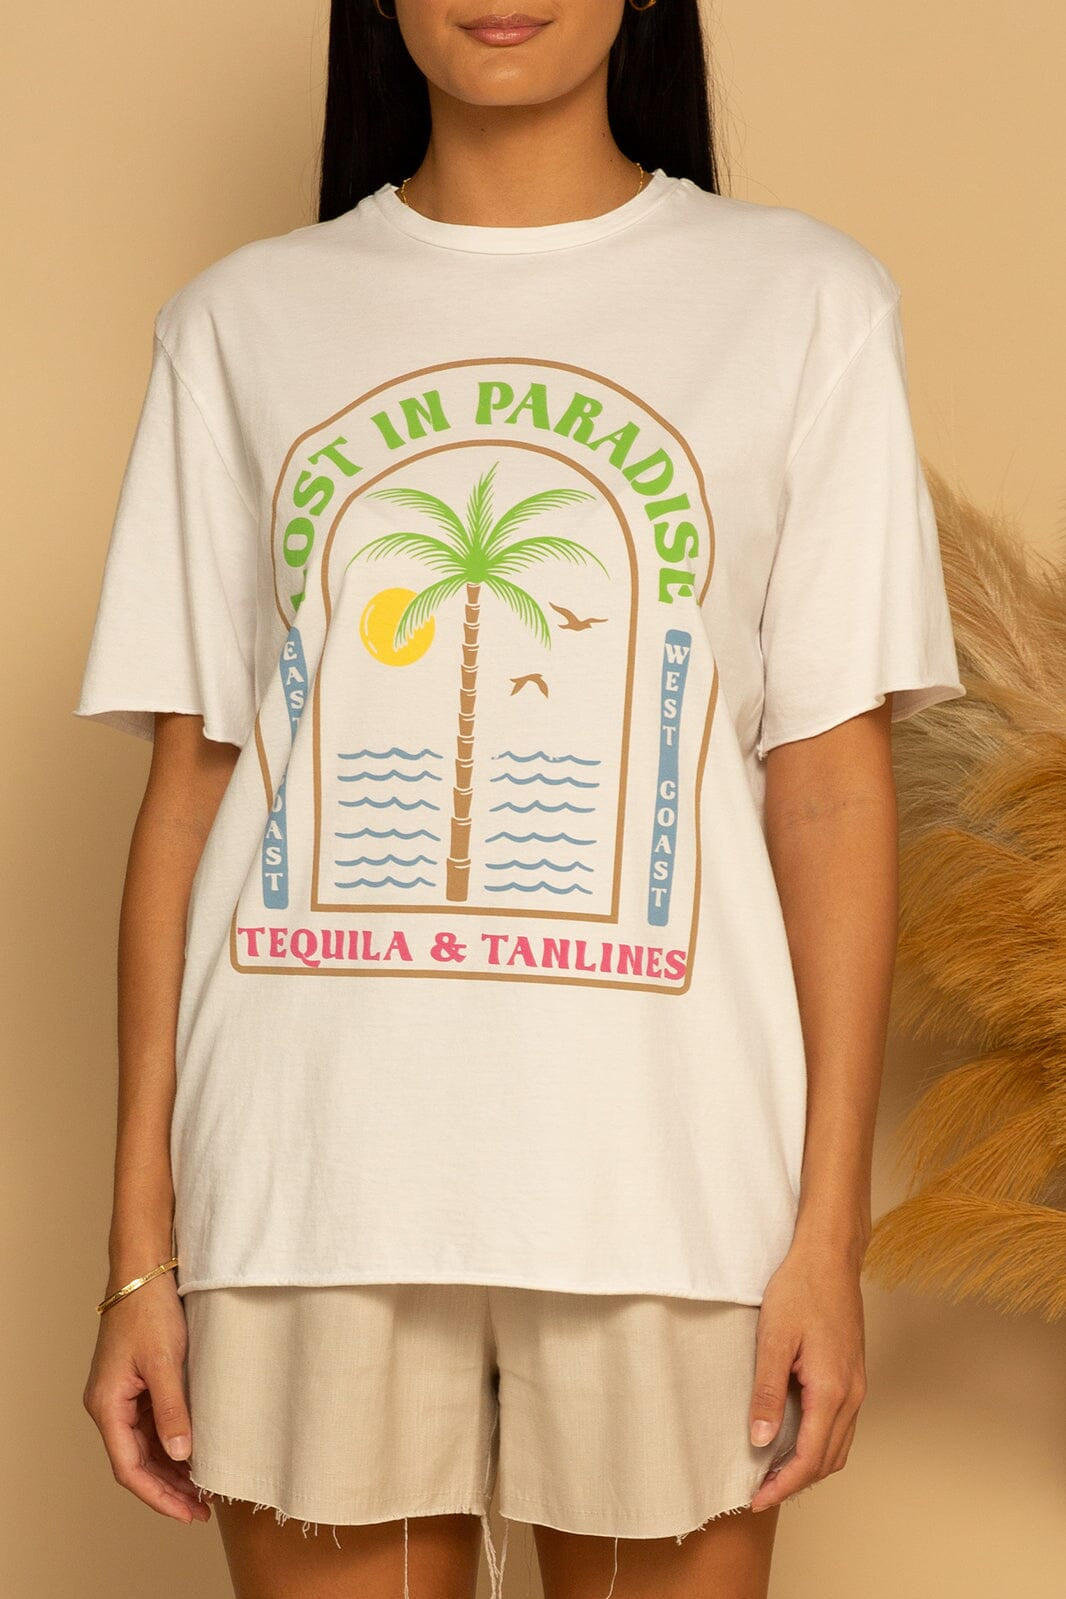 LOST IN PARADISE GRAPHIC TEE - WHITE - XS